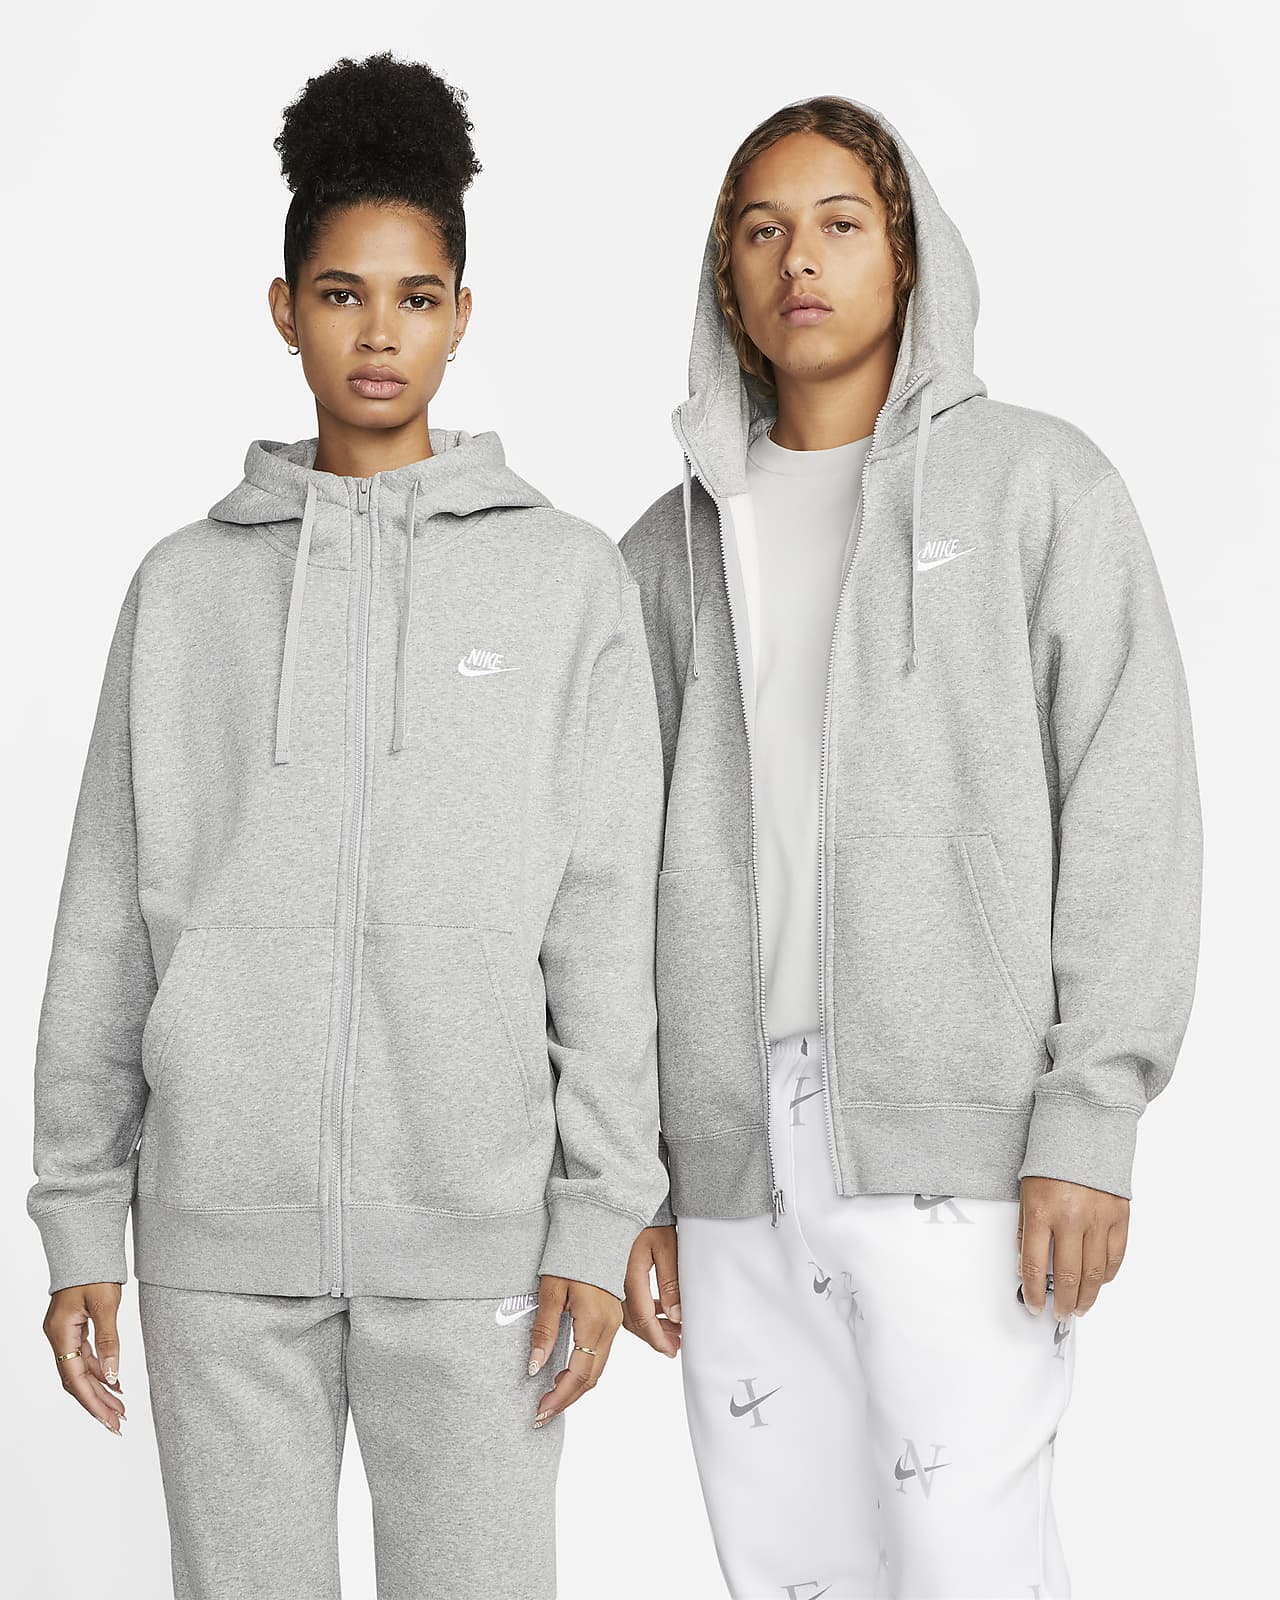 https://static.nike.com/a/images/t_PDP_1280_v1/f_auto,q_auto:eco/55c0de6c-e0f6-4699-9243-ae0d00d56a0e/hoodie-com-fecho-completo-sportswear-club-fleece-499tc4.png